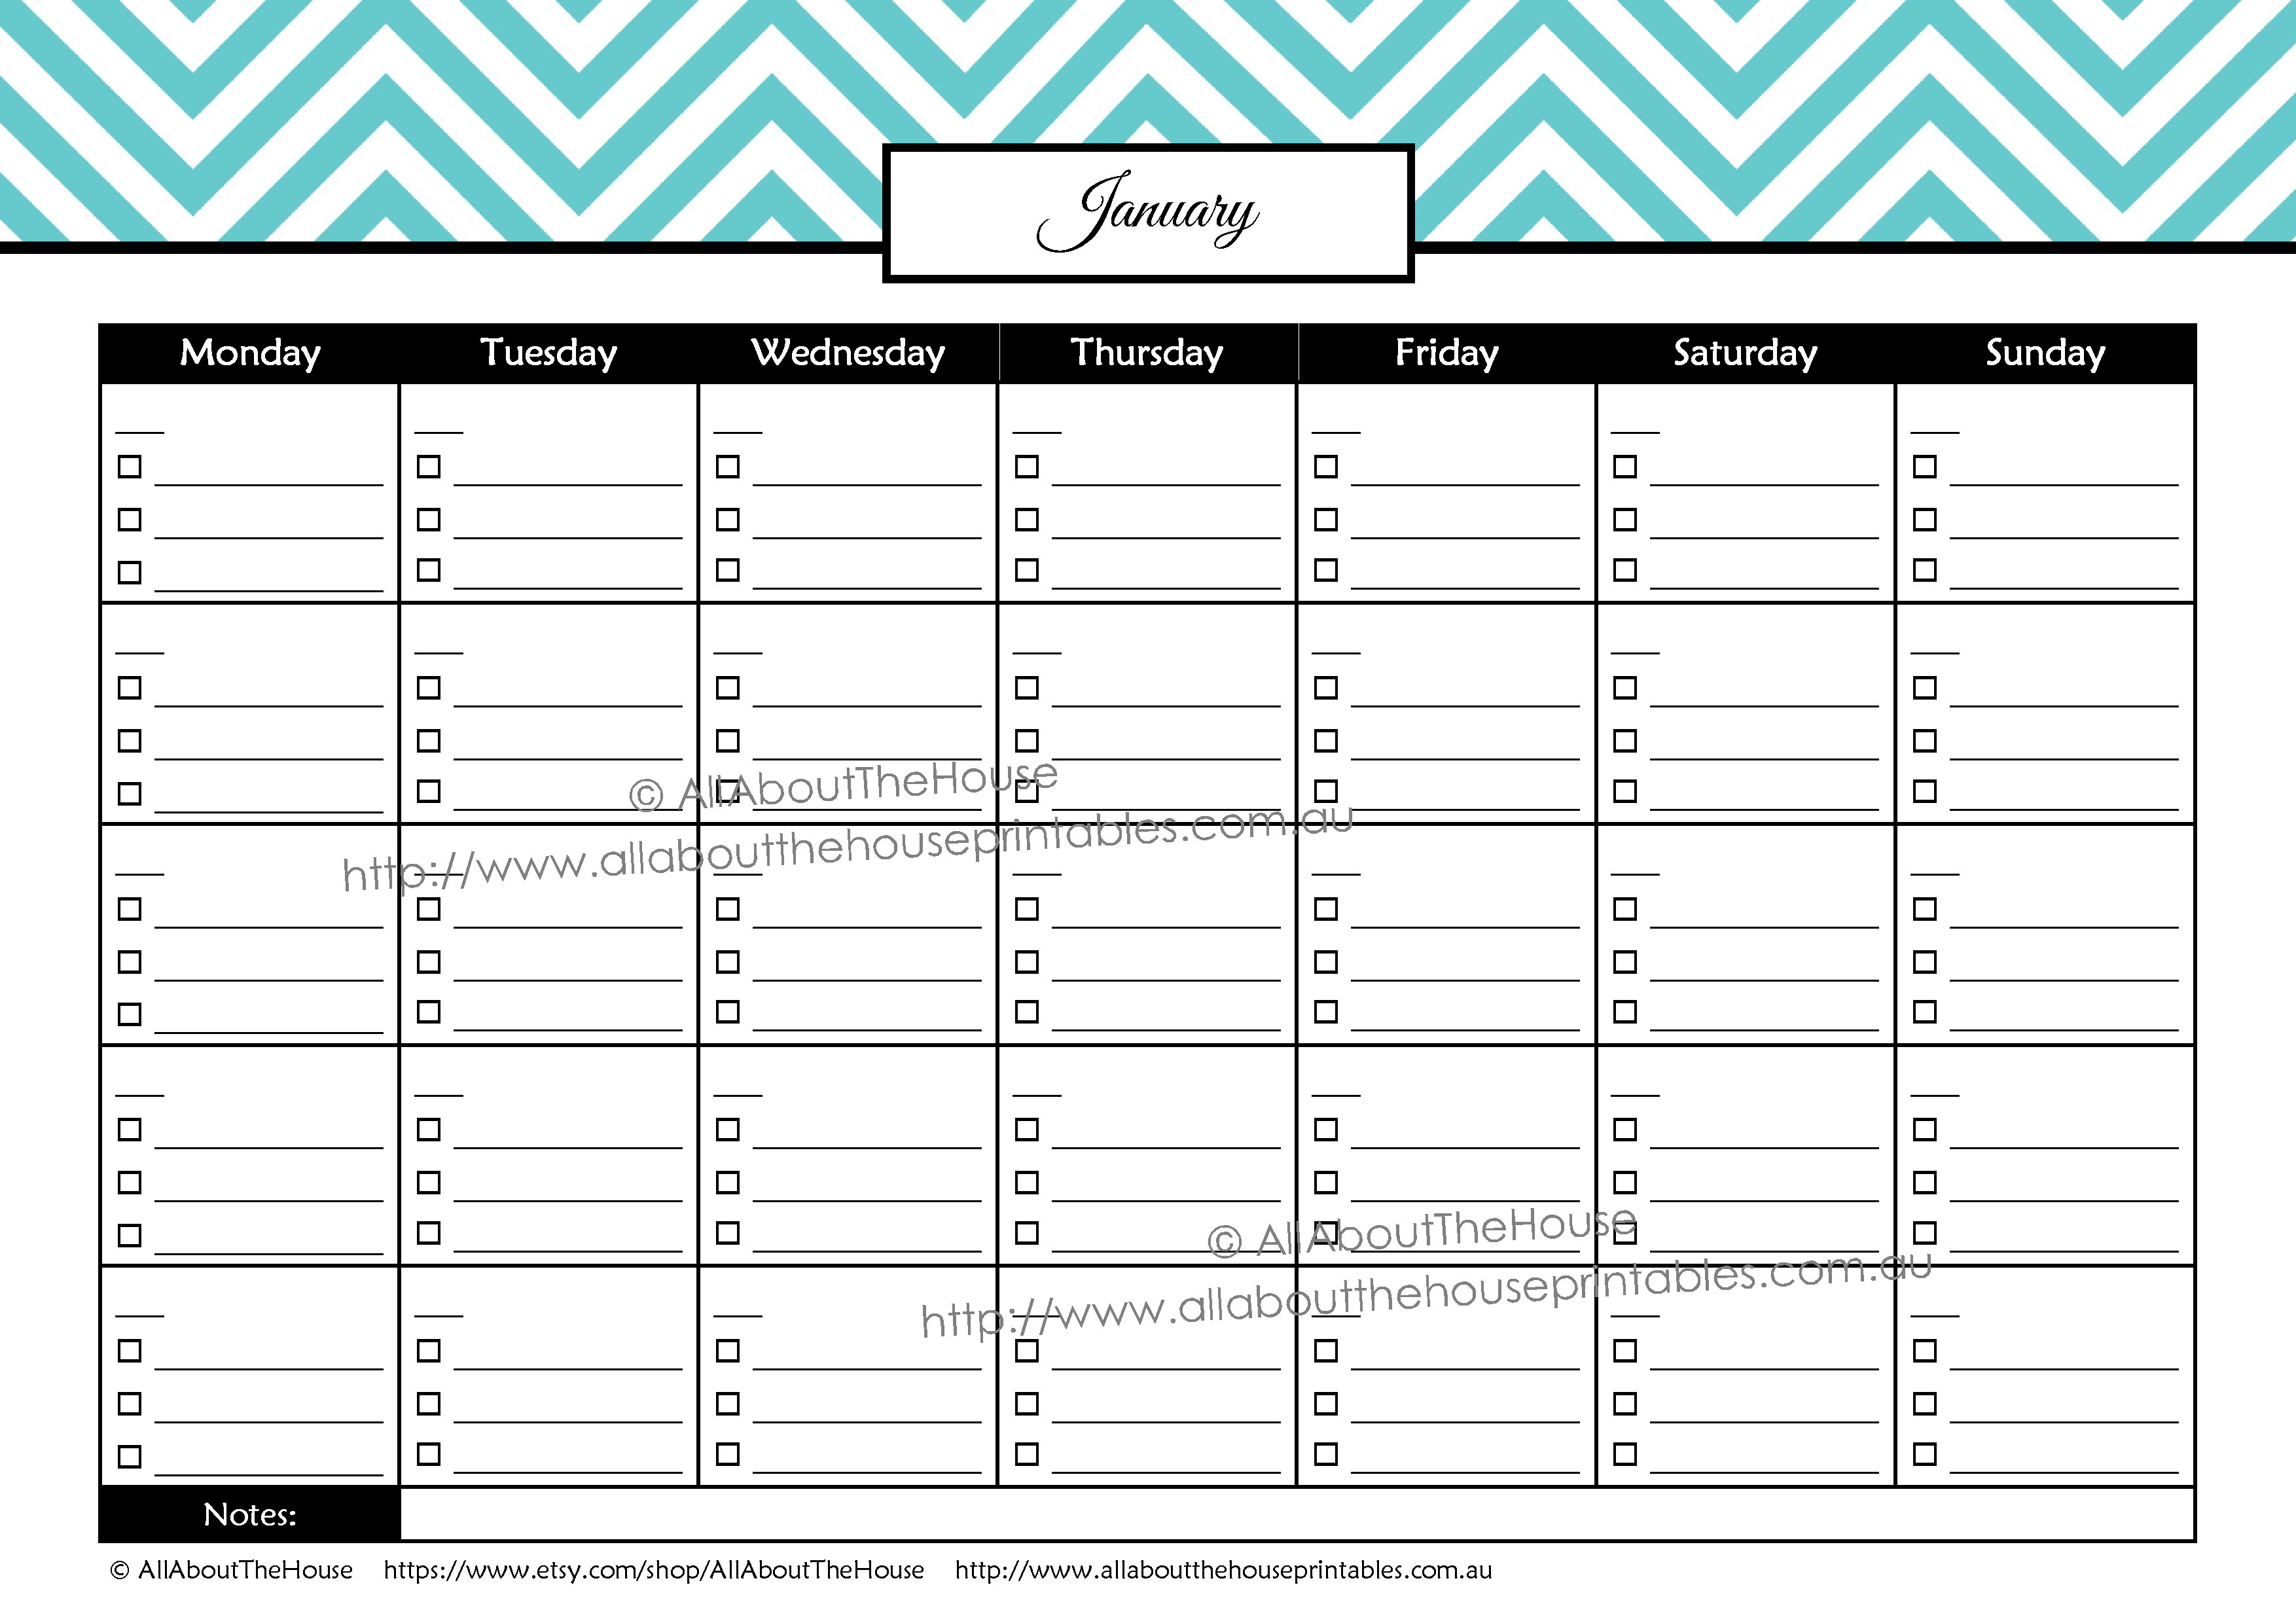 budget-printable-images-gallery-category-page-4-printablee